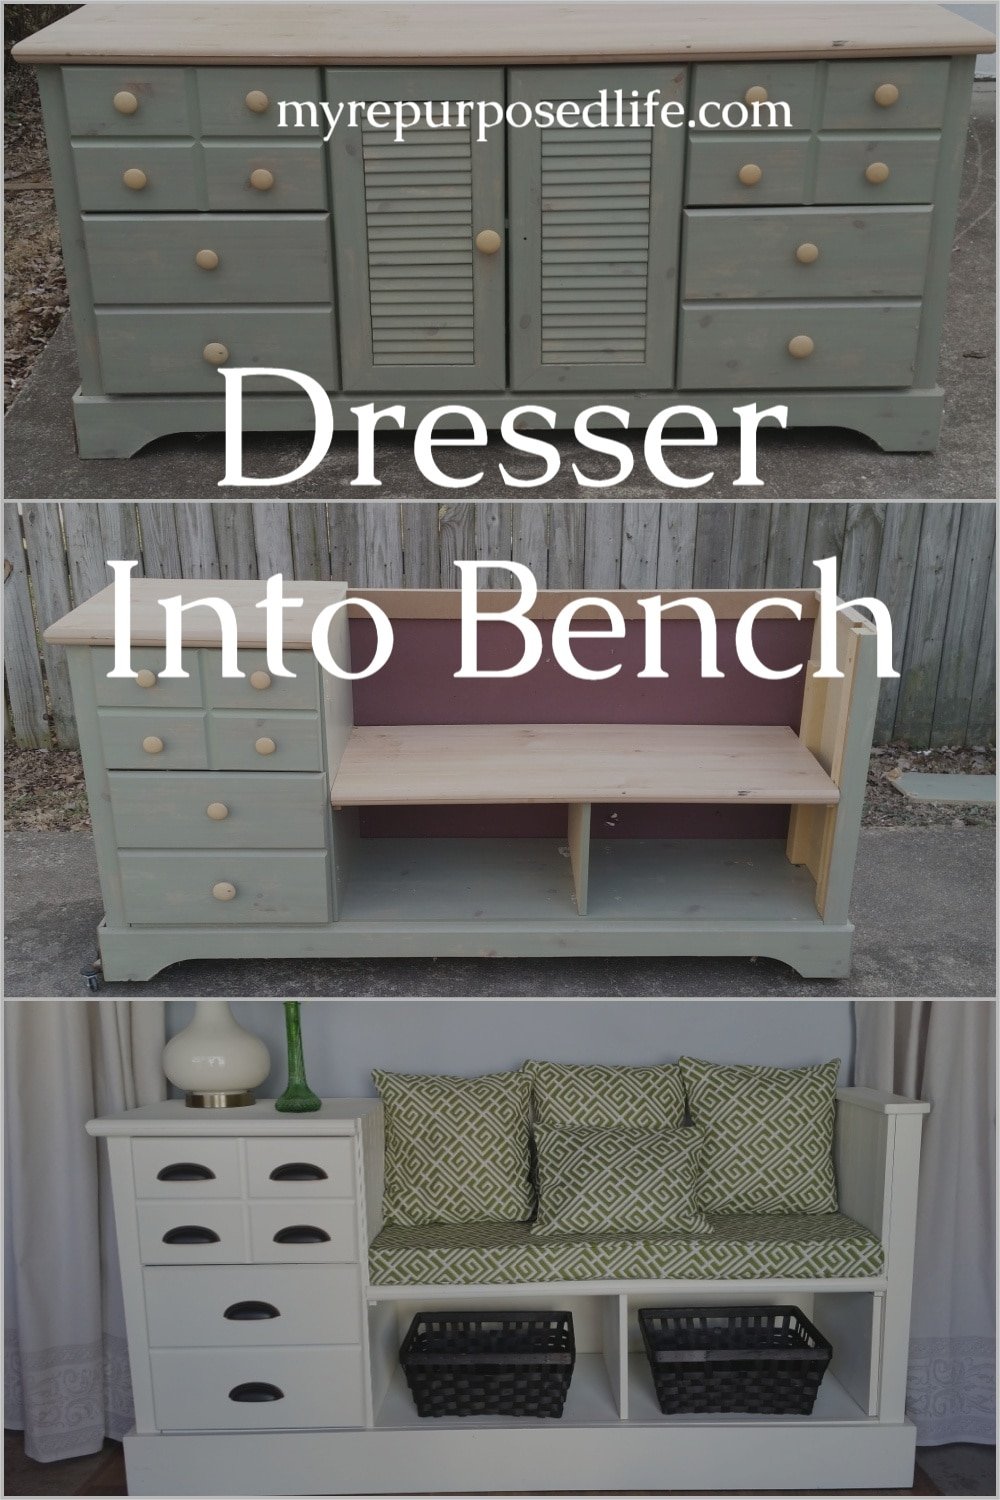 Make a storage bench using a cheap dresser. A few extra touches like cup pulls, upholstery and pillows makes a huge difference. Step by step tutorial. #MyRepurposedLife #upcycle #repurpose #dresser #bench #storage #diy via @repurposedlife